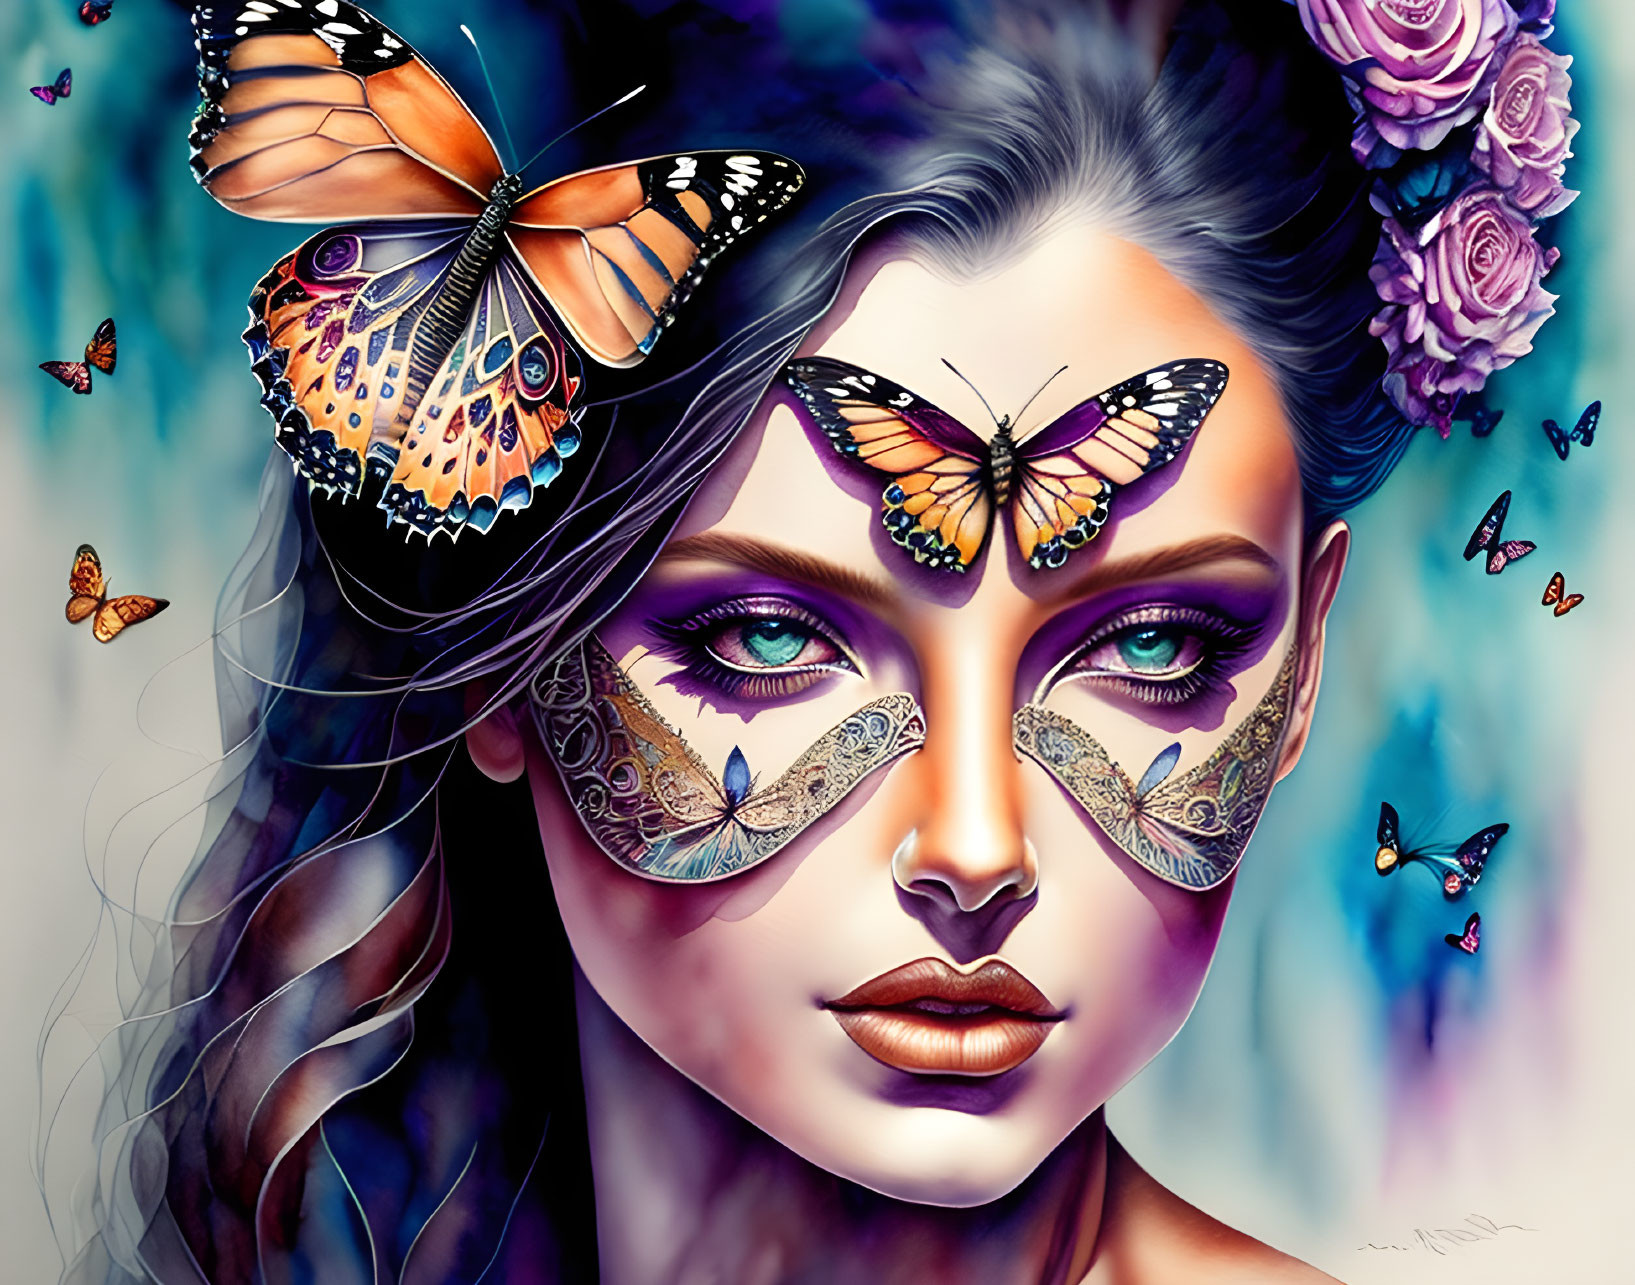 Woman with Butterfly-Themed Makeup and Real Butterflies on Blue Background